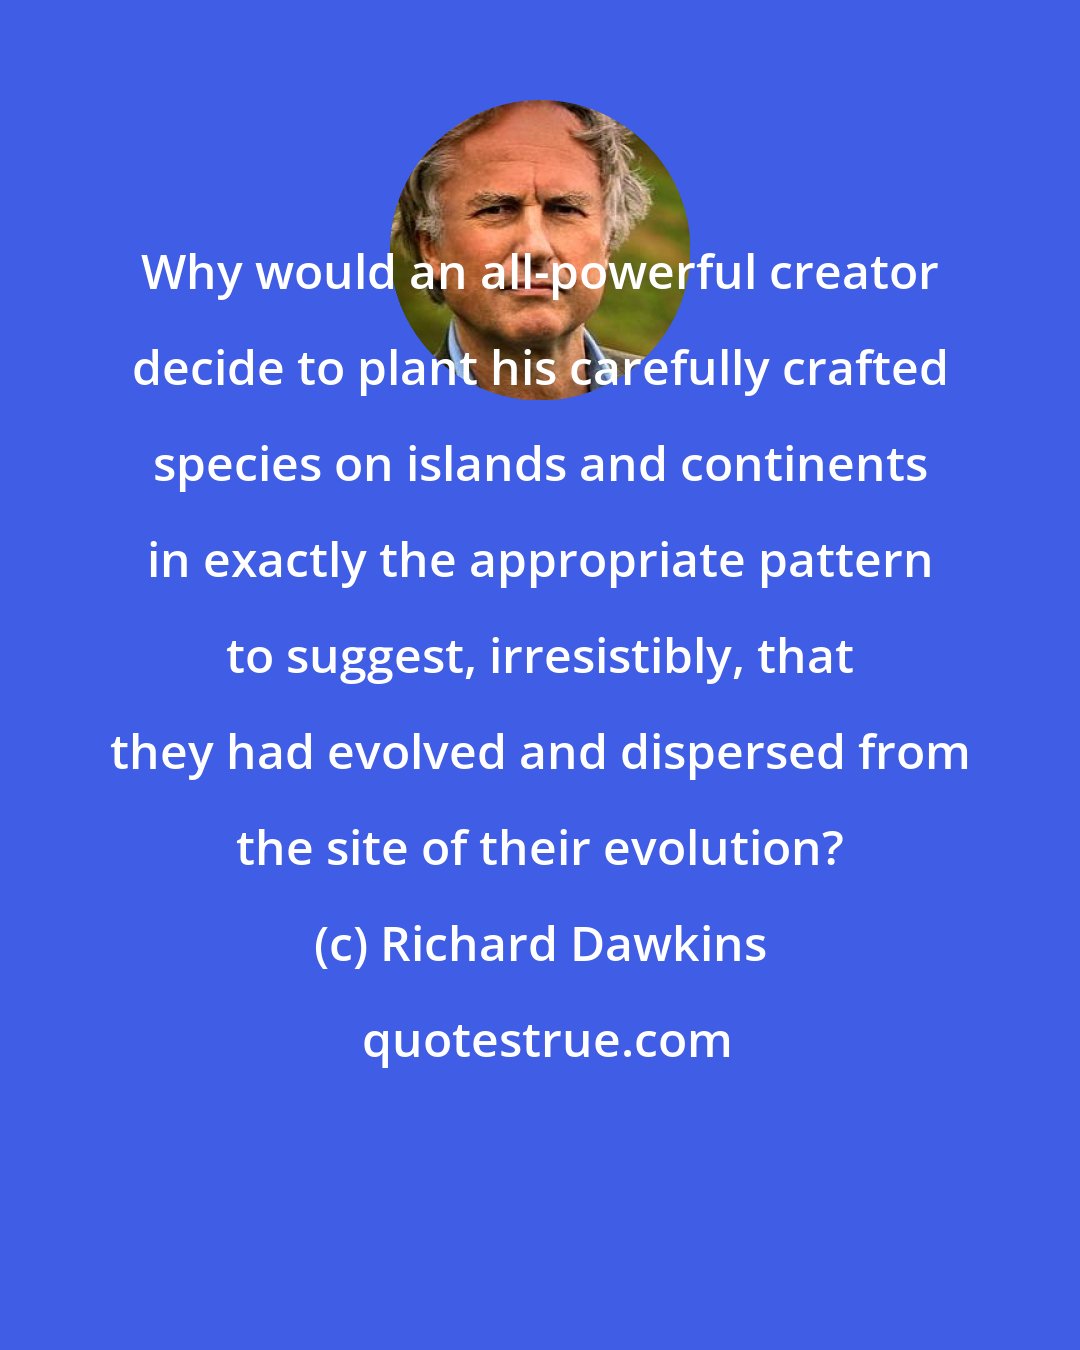 Richard Dawkins: Why would an all-powerful creator decide to plant his carefully crafted species on islands and continents in exactly the appropriate pattern to suggest, irresistibly, that they had evolved and dispersed from the site of their evolution?